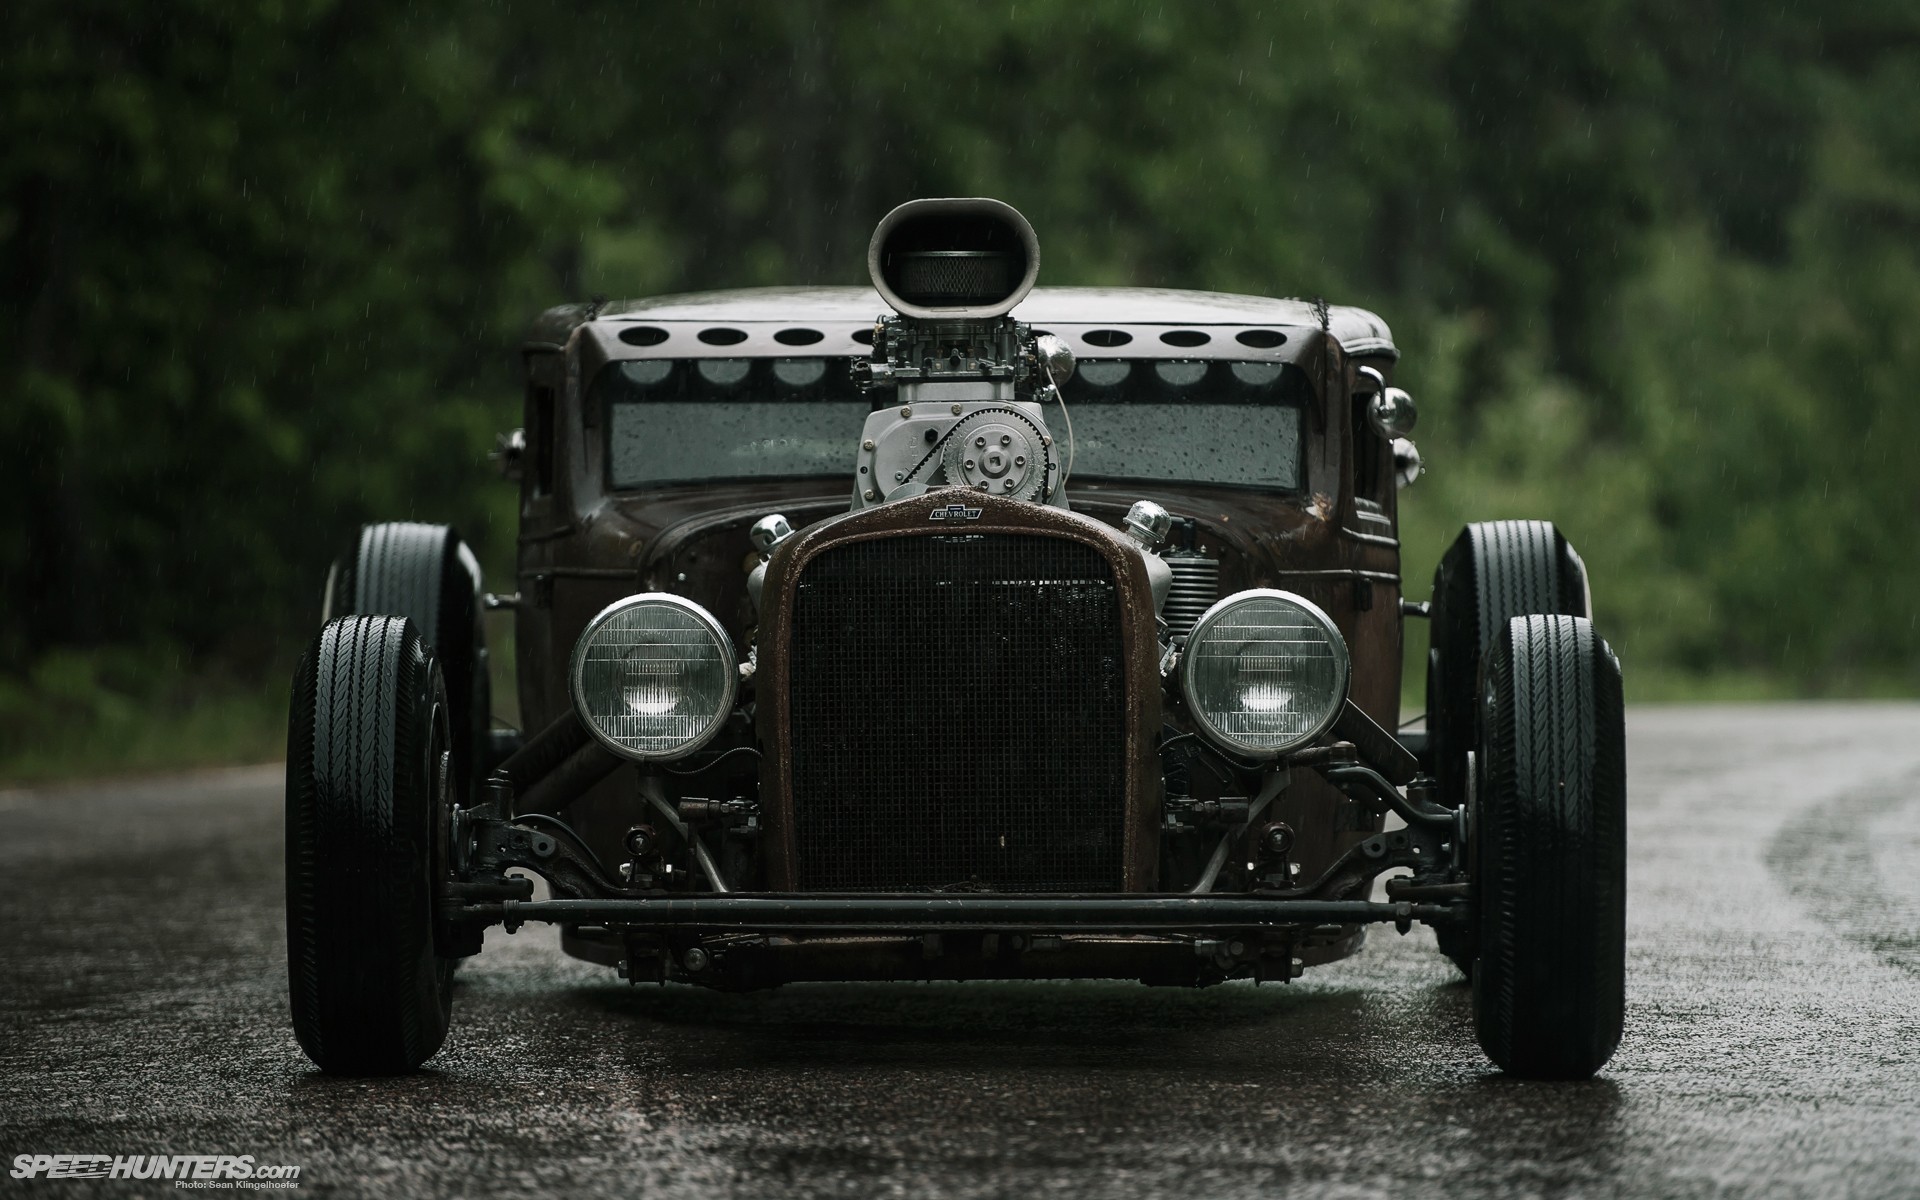 Old Car Chevrolet Engines Engine Exhaust Hot Rod Roadster Car Speedhunters Vehicle Road Asphalt Fron 1920x1200